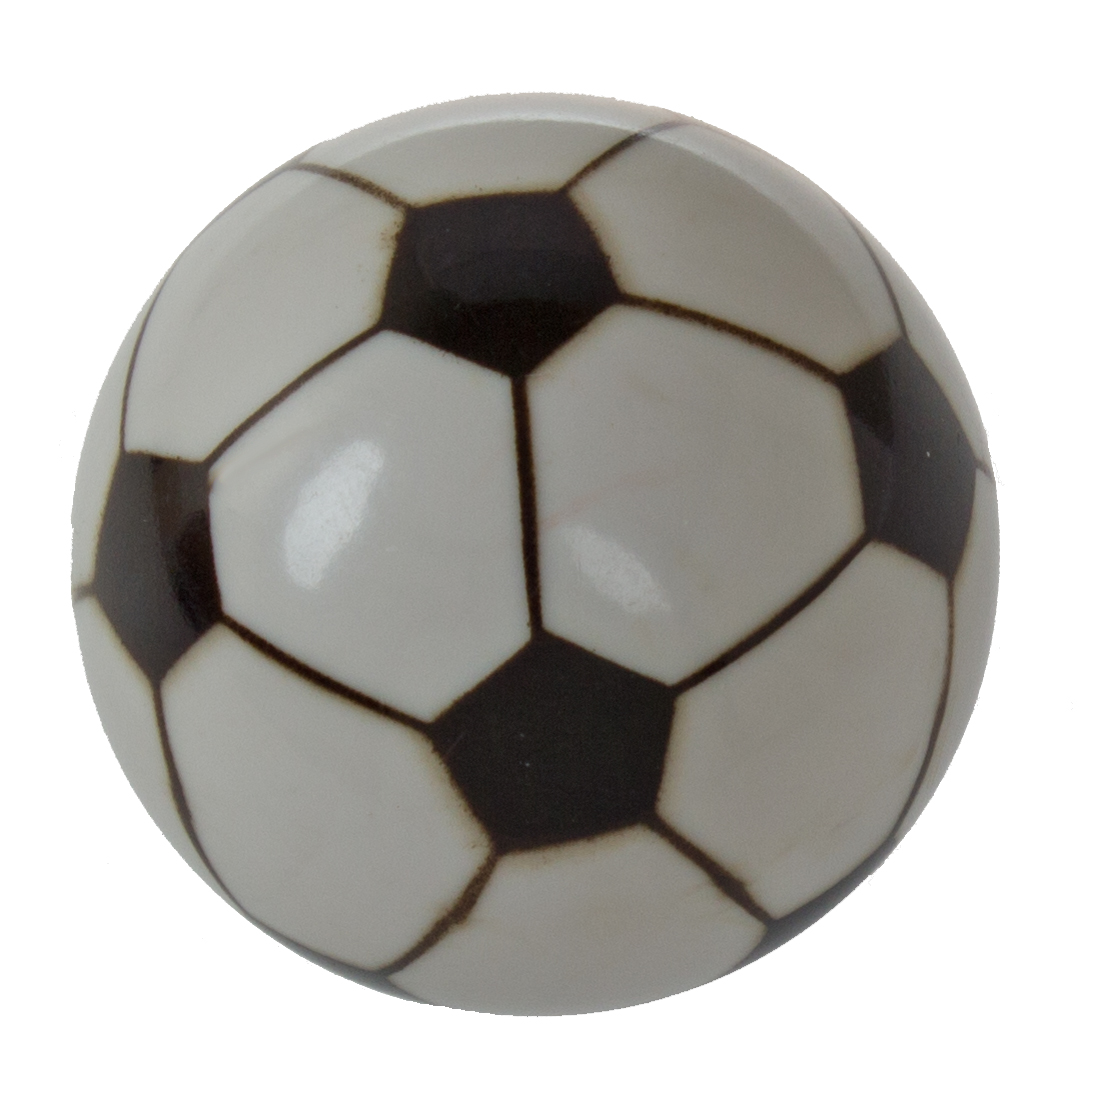 GlideRite 1-1/4 in. Soccer Ball Sports Dresser Drawer Cabinet Knobs, Pack of 5 - image 1 of 4